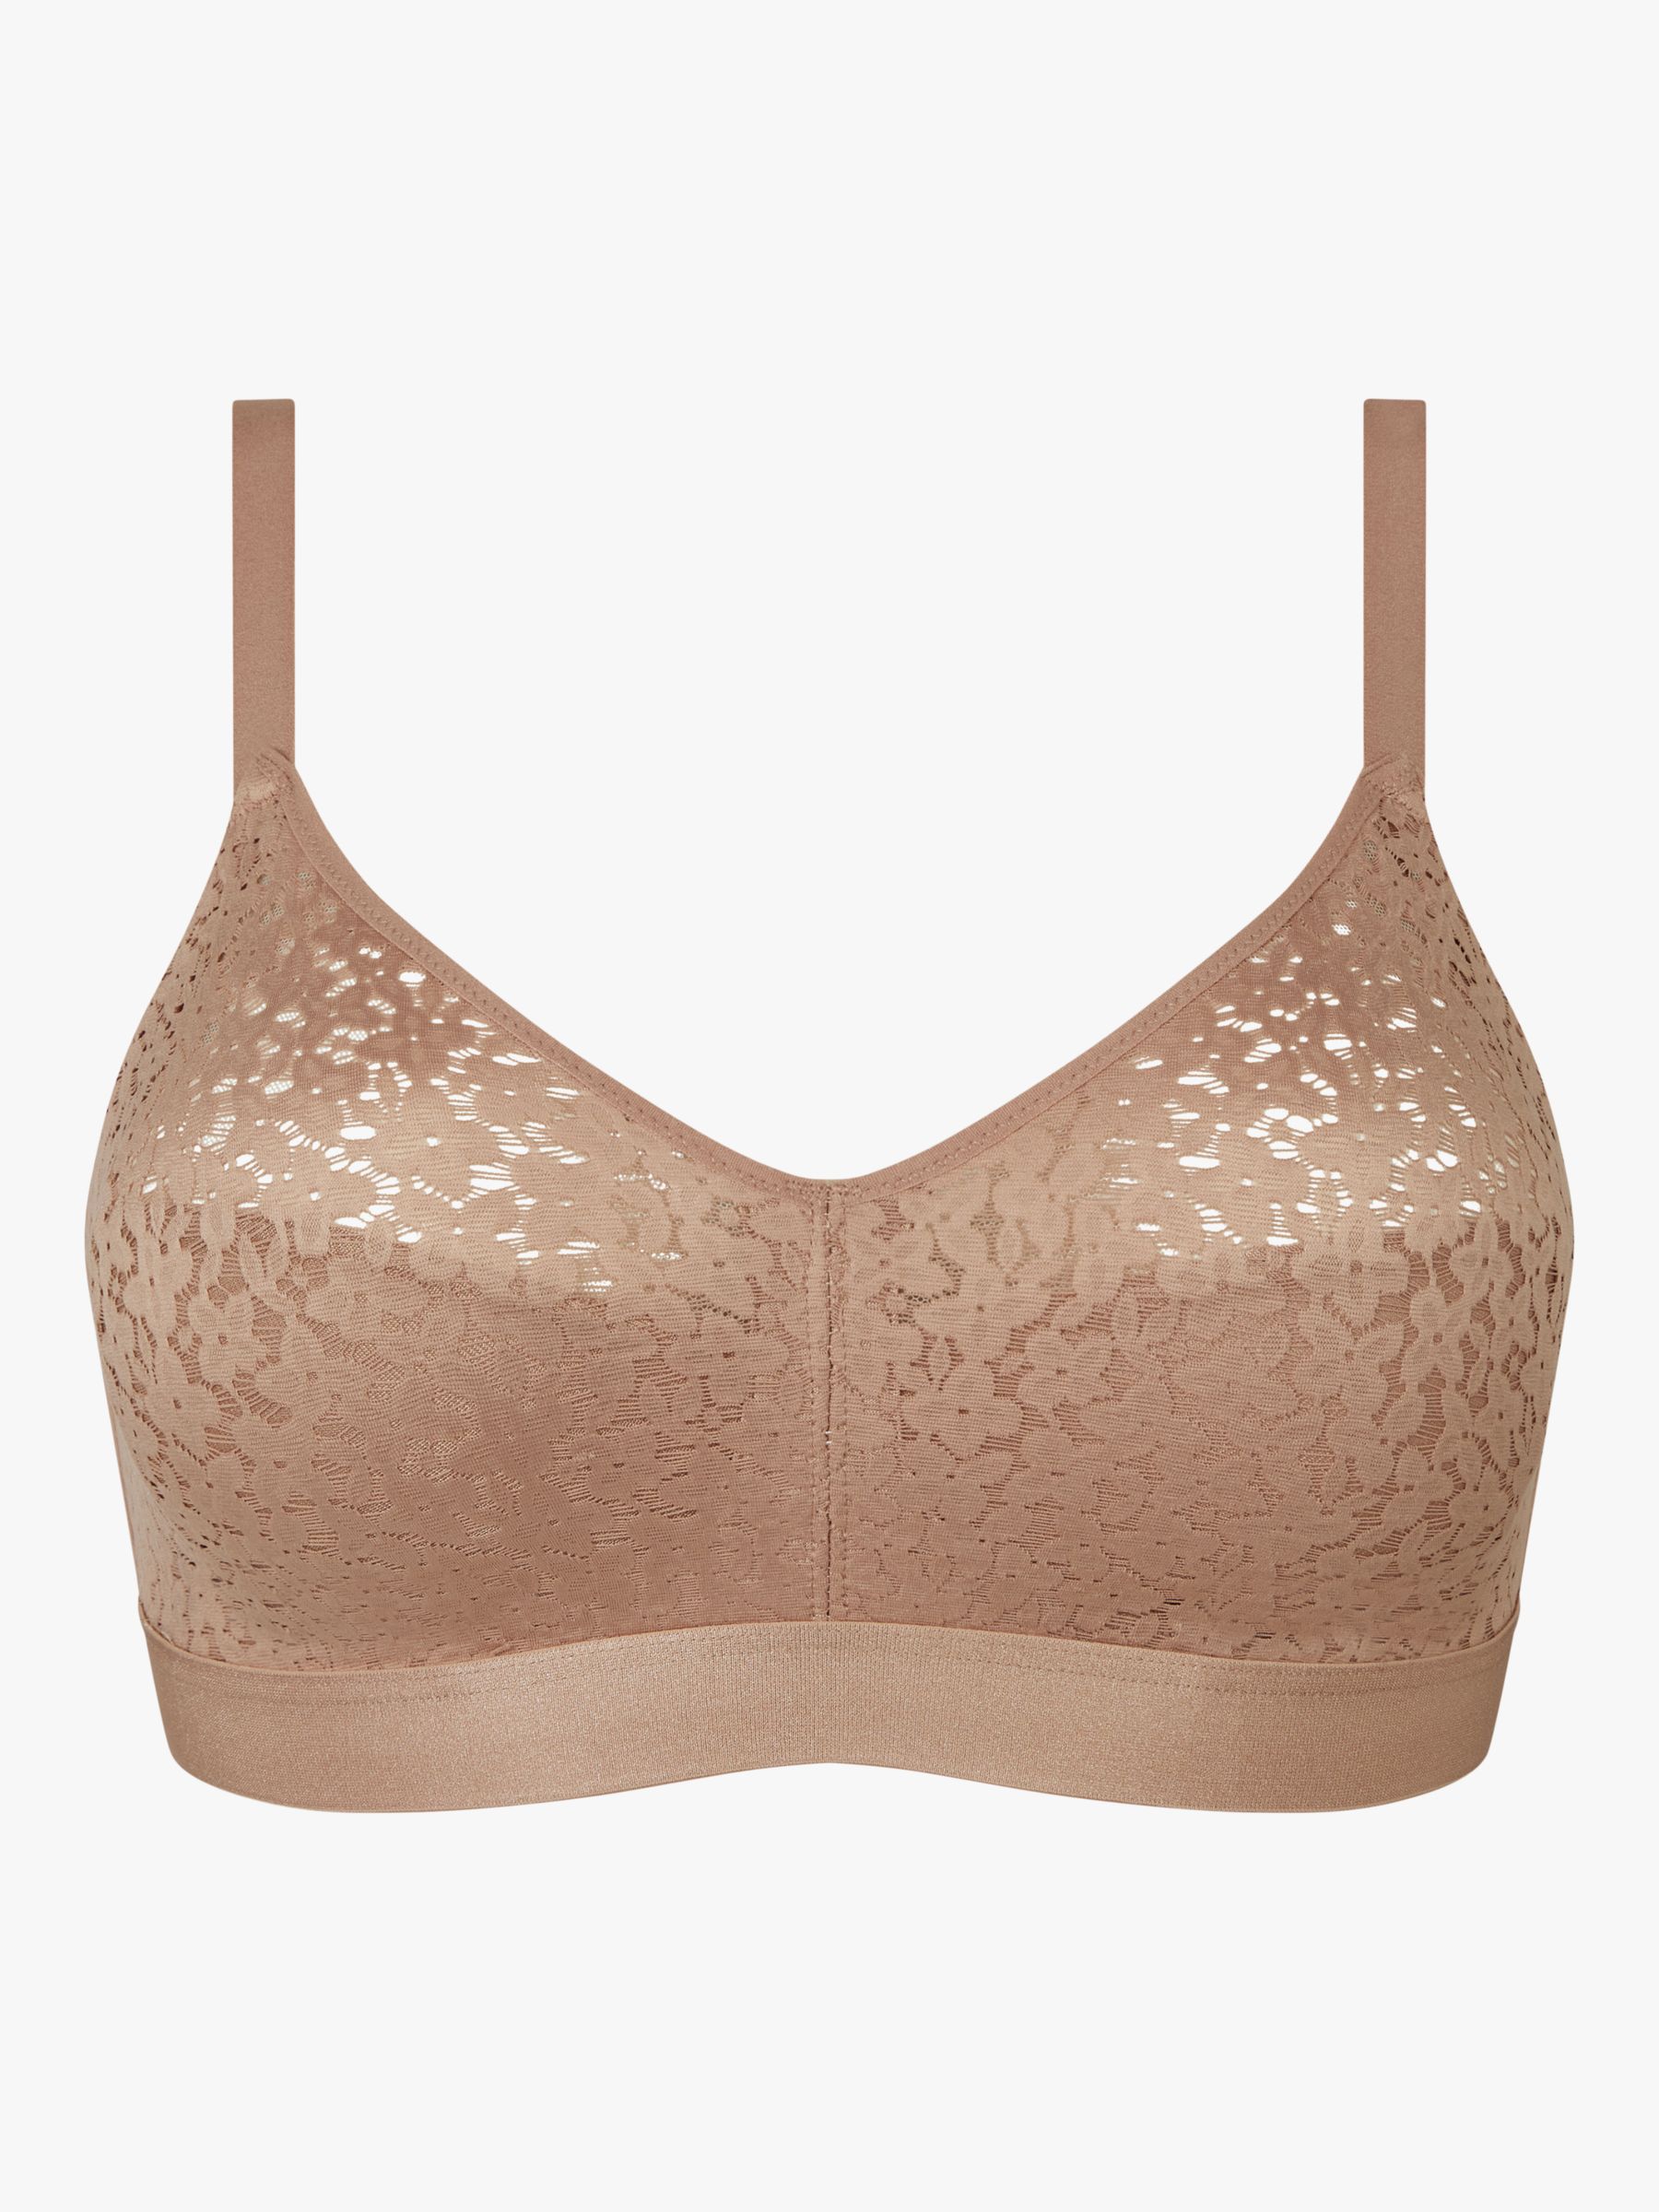 Chantelle Norah Comfort Non-Wired Support Bra, Black at John Lewis